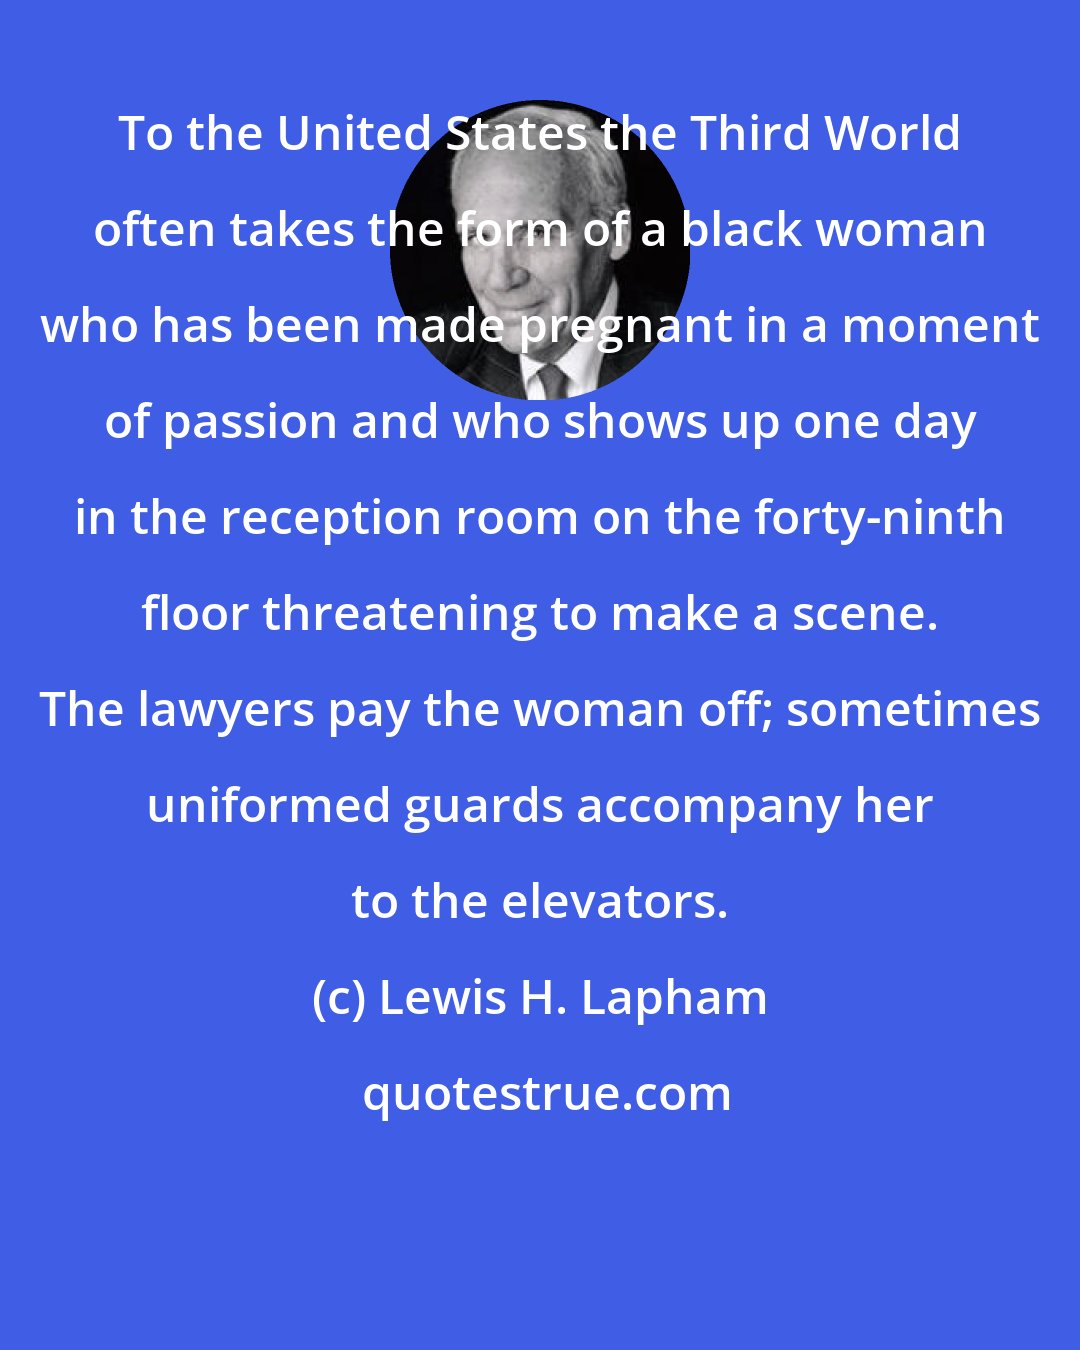 Lewis H. Lapham: To the United States the Third World often takes the form of a black woman who has been made pregnant in a moment of passion and who shows up one day in the reception room on the forty-ninth floor threatening to make a scene. The lawyers pay the woman off; sometimes uniformed guards accompany her to the elevators.